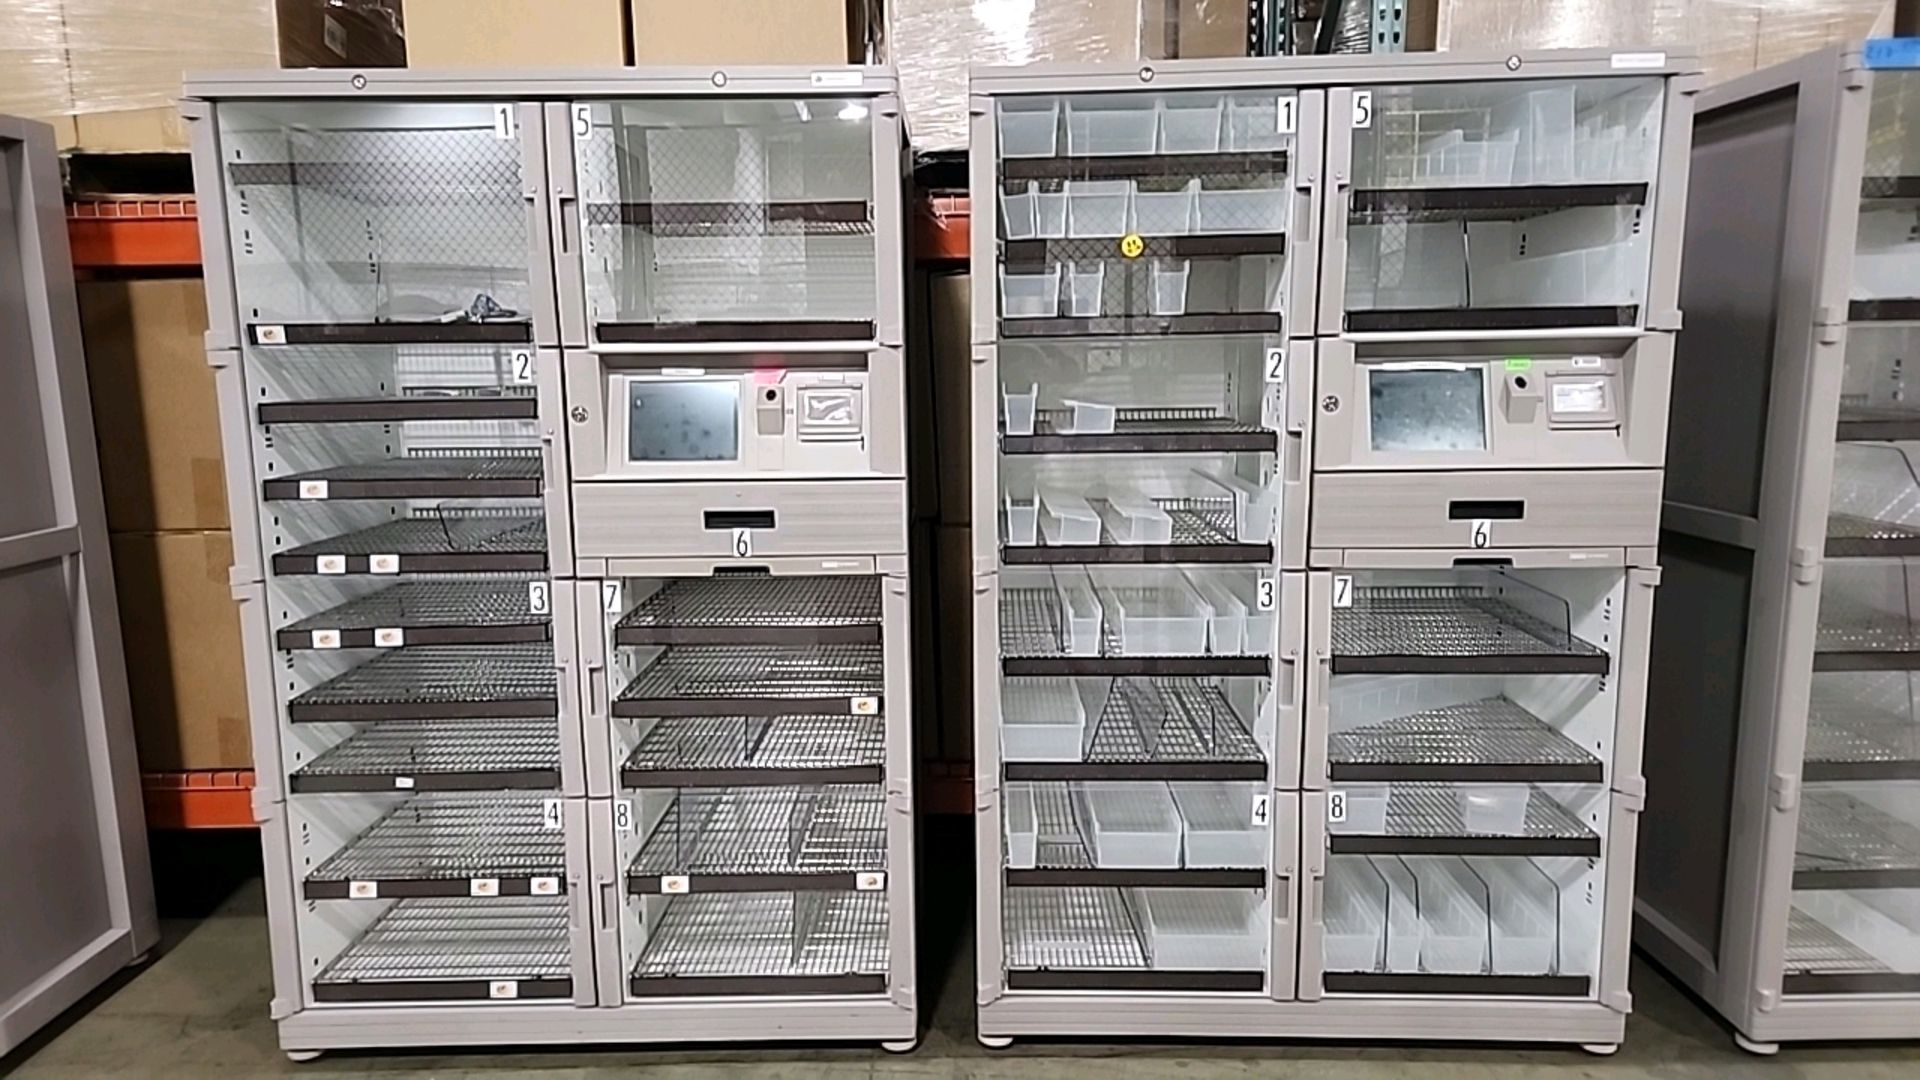 BD PYXIS 347 UNIVERSAL 601 SUPPLY CABINET, 2-DOOR, QTY(2) LOCATION: 100 GOLDEN DR. CODE: 218